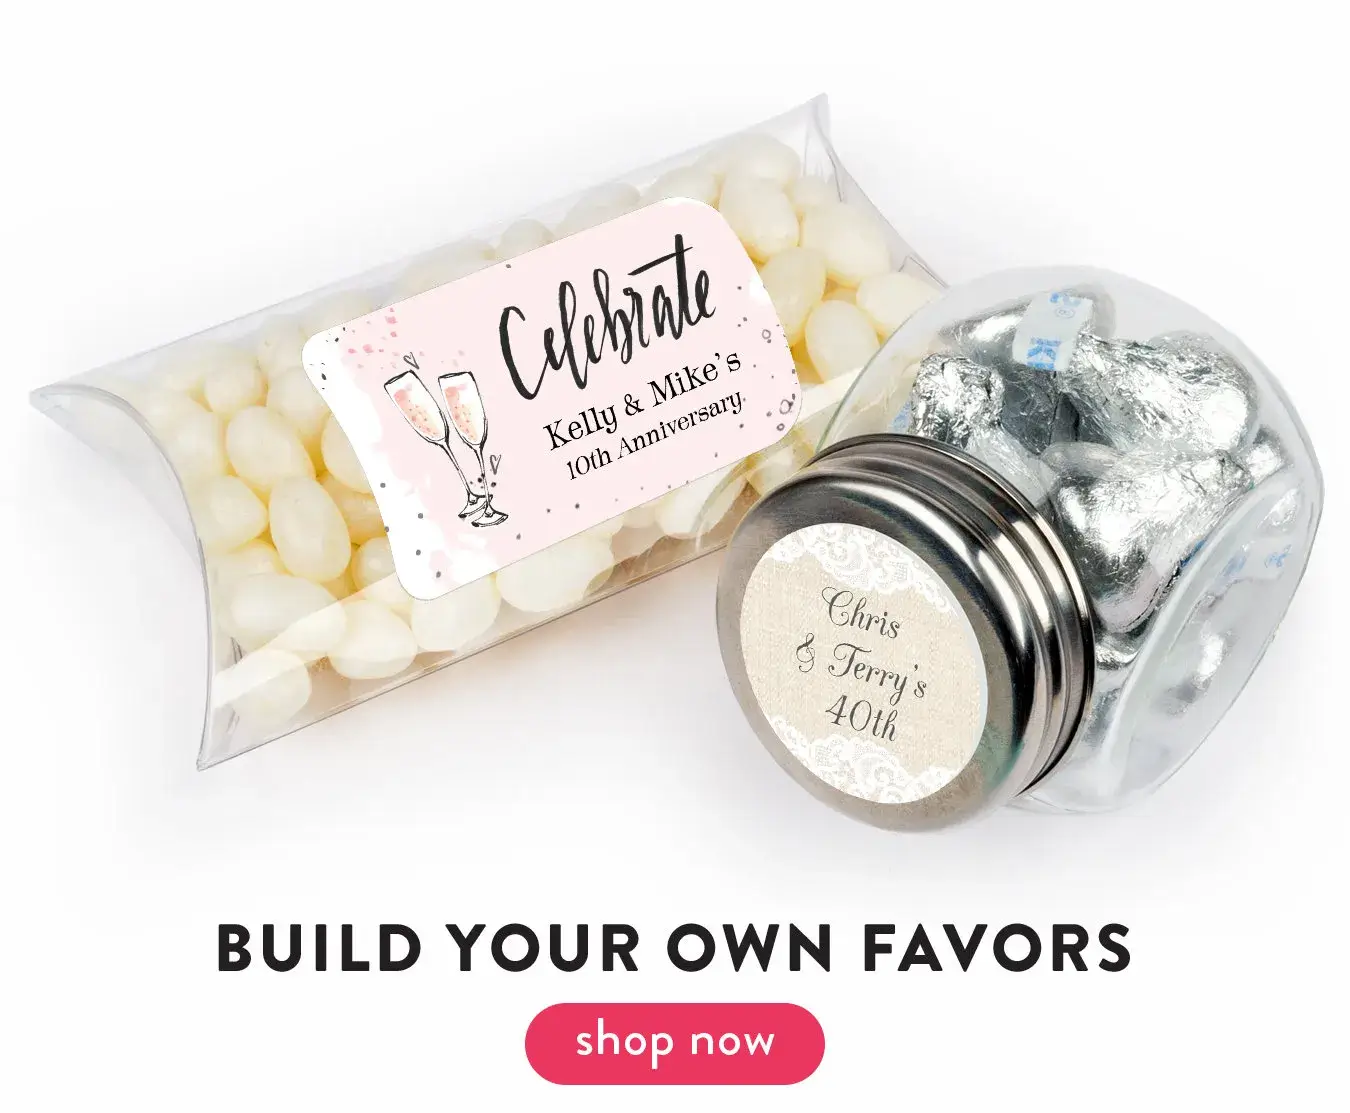 Build Your Own Favors